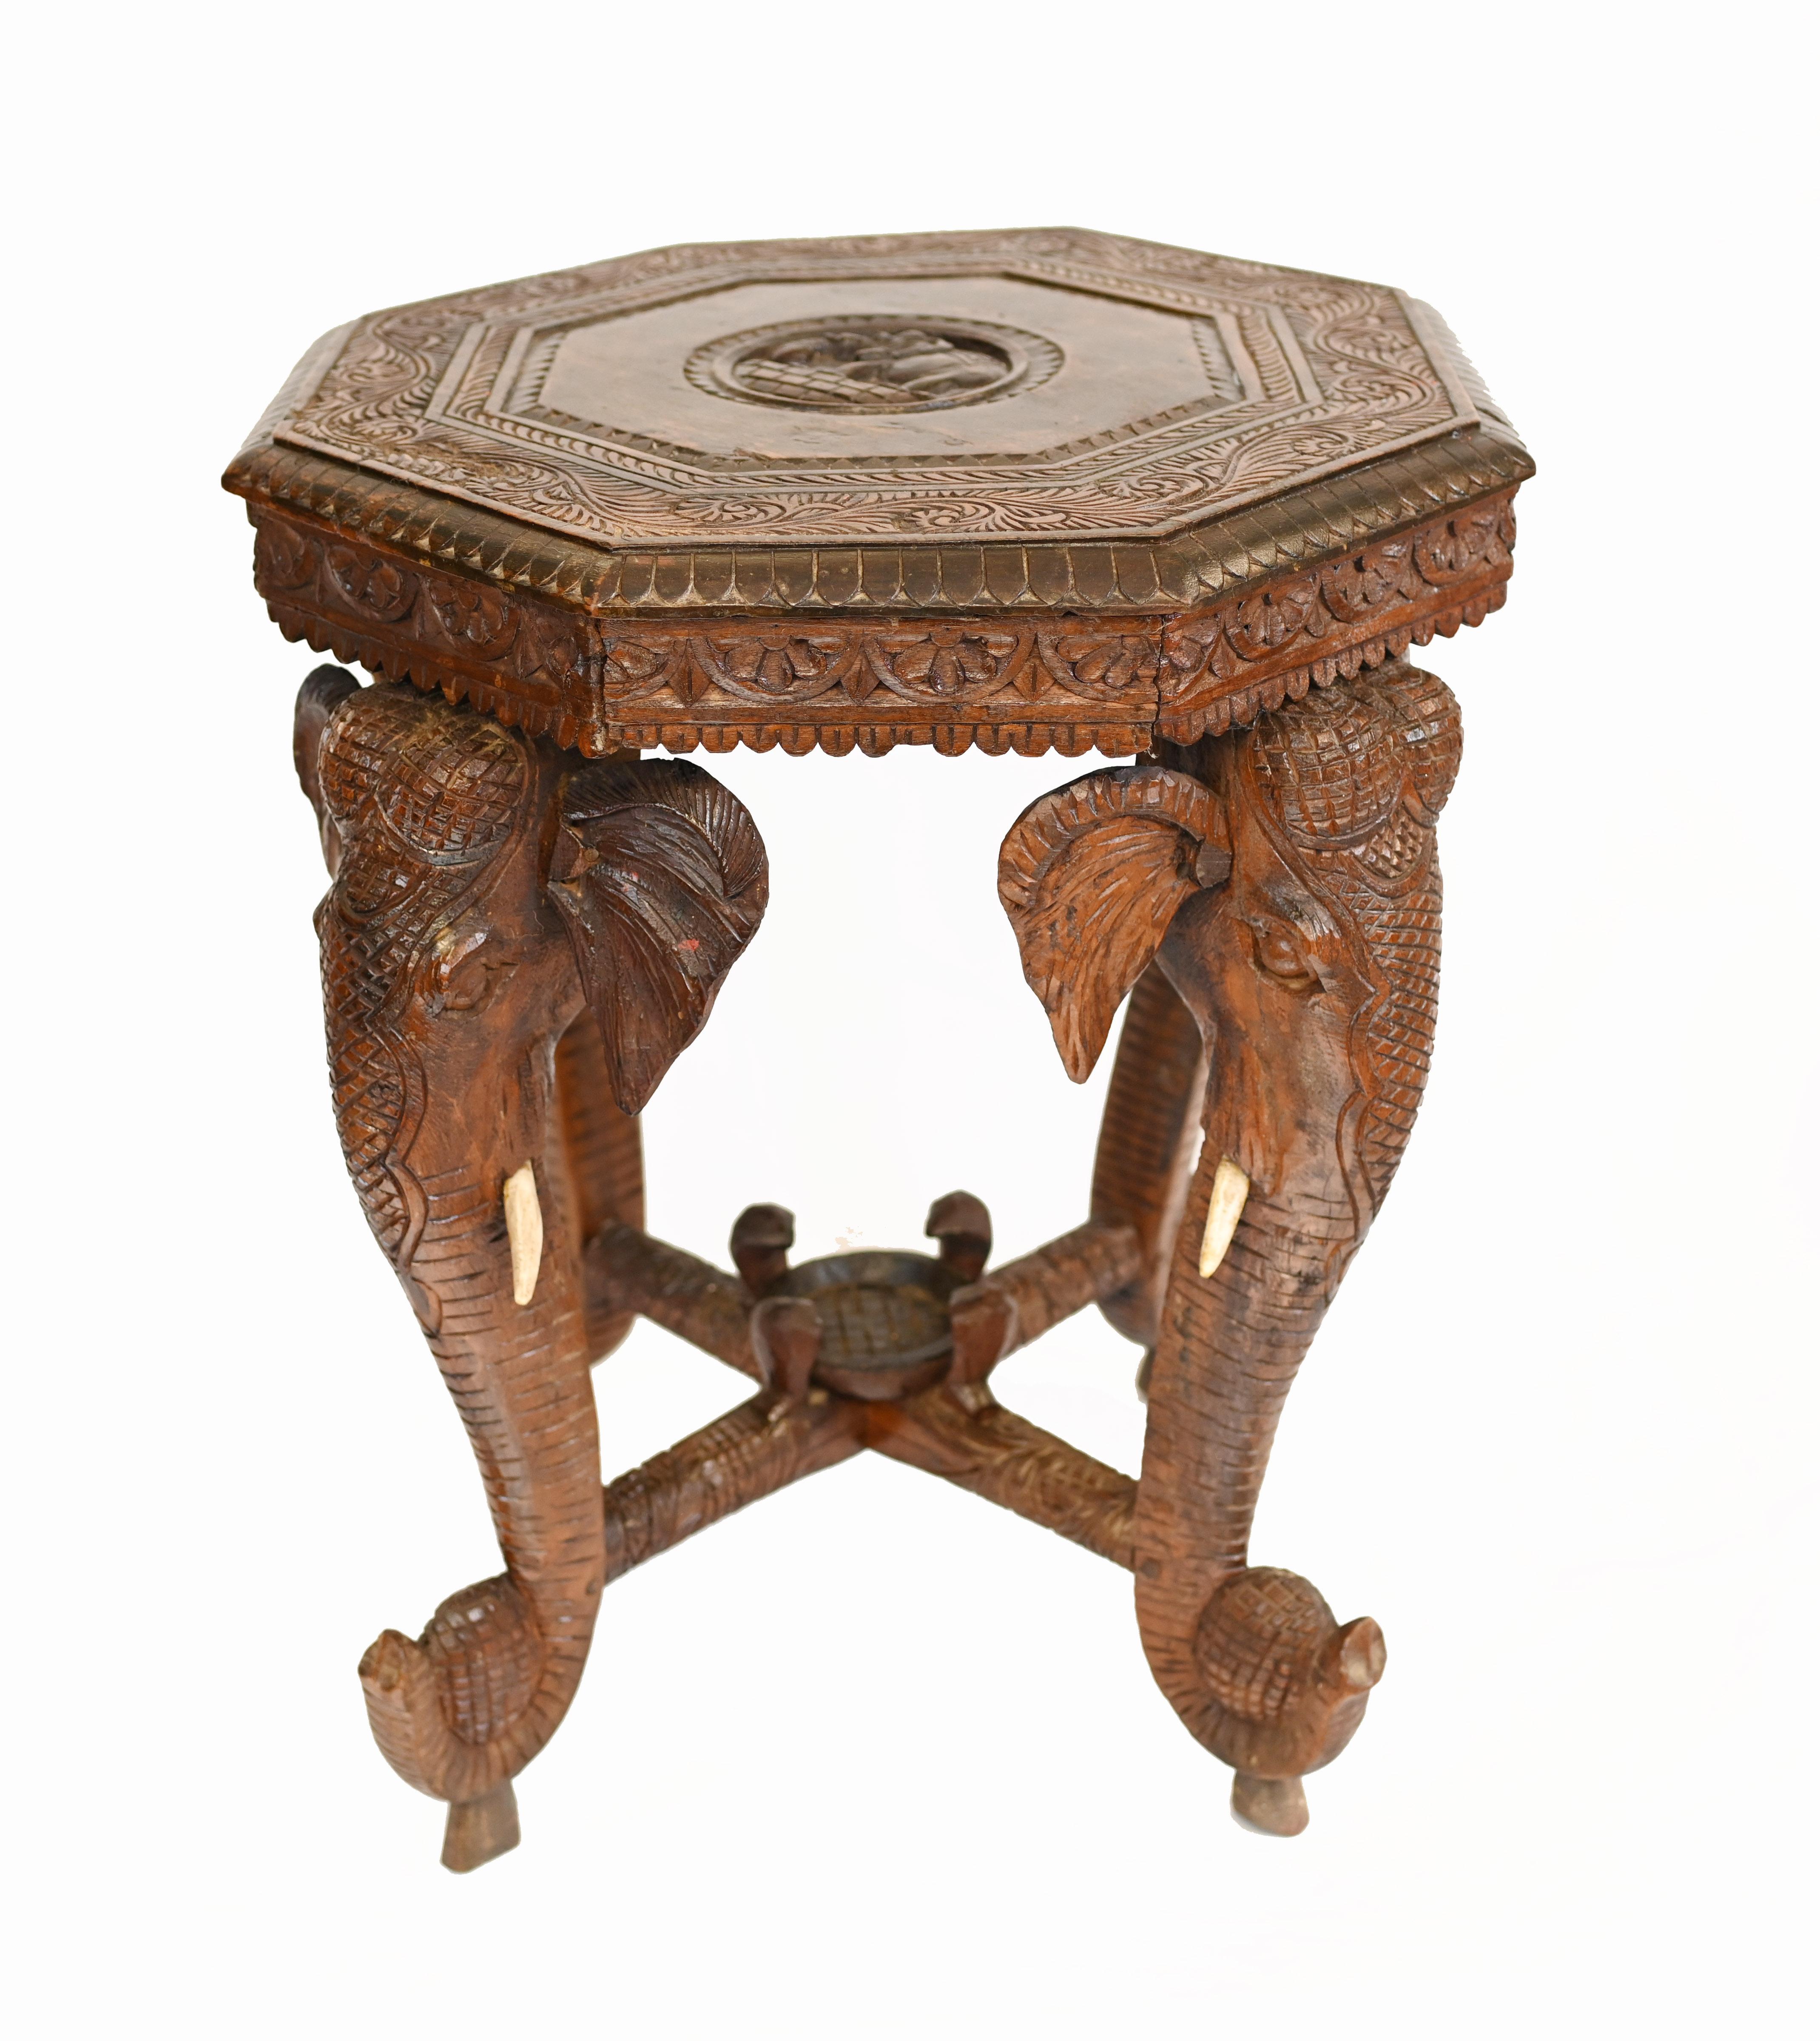 A fine Burmese elephant table heavily carved with a hexagonal top supported by four elephants with simulated wooden ivory tusks
Circa 1880
Highly collectable interiors piece
Some of our items are in storage so please check ahead of a viewing to